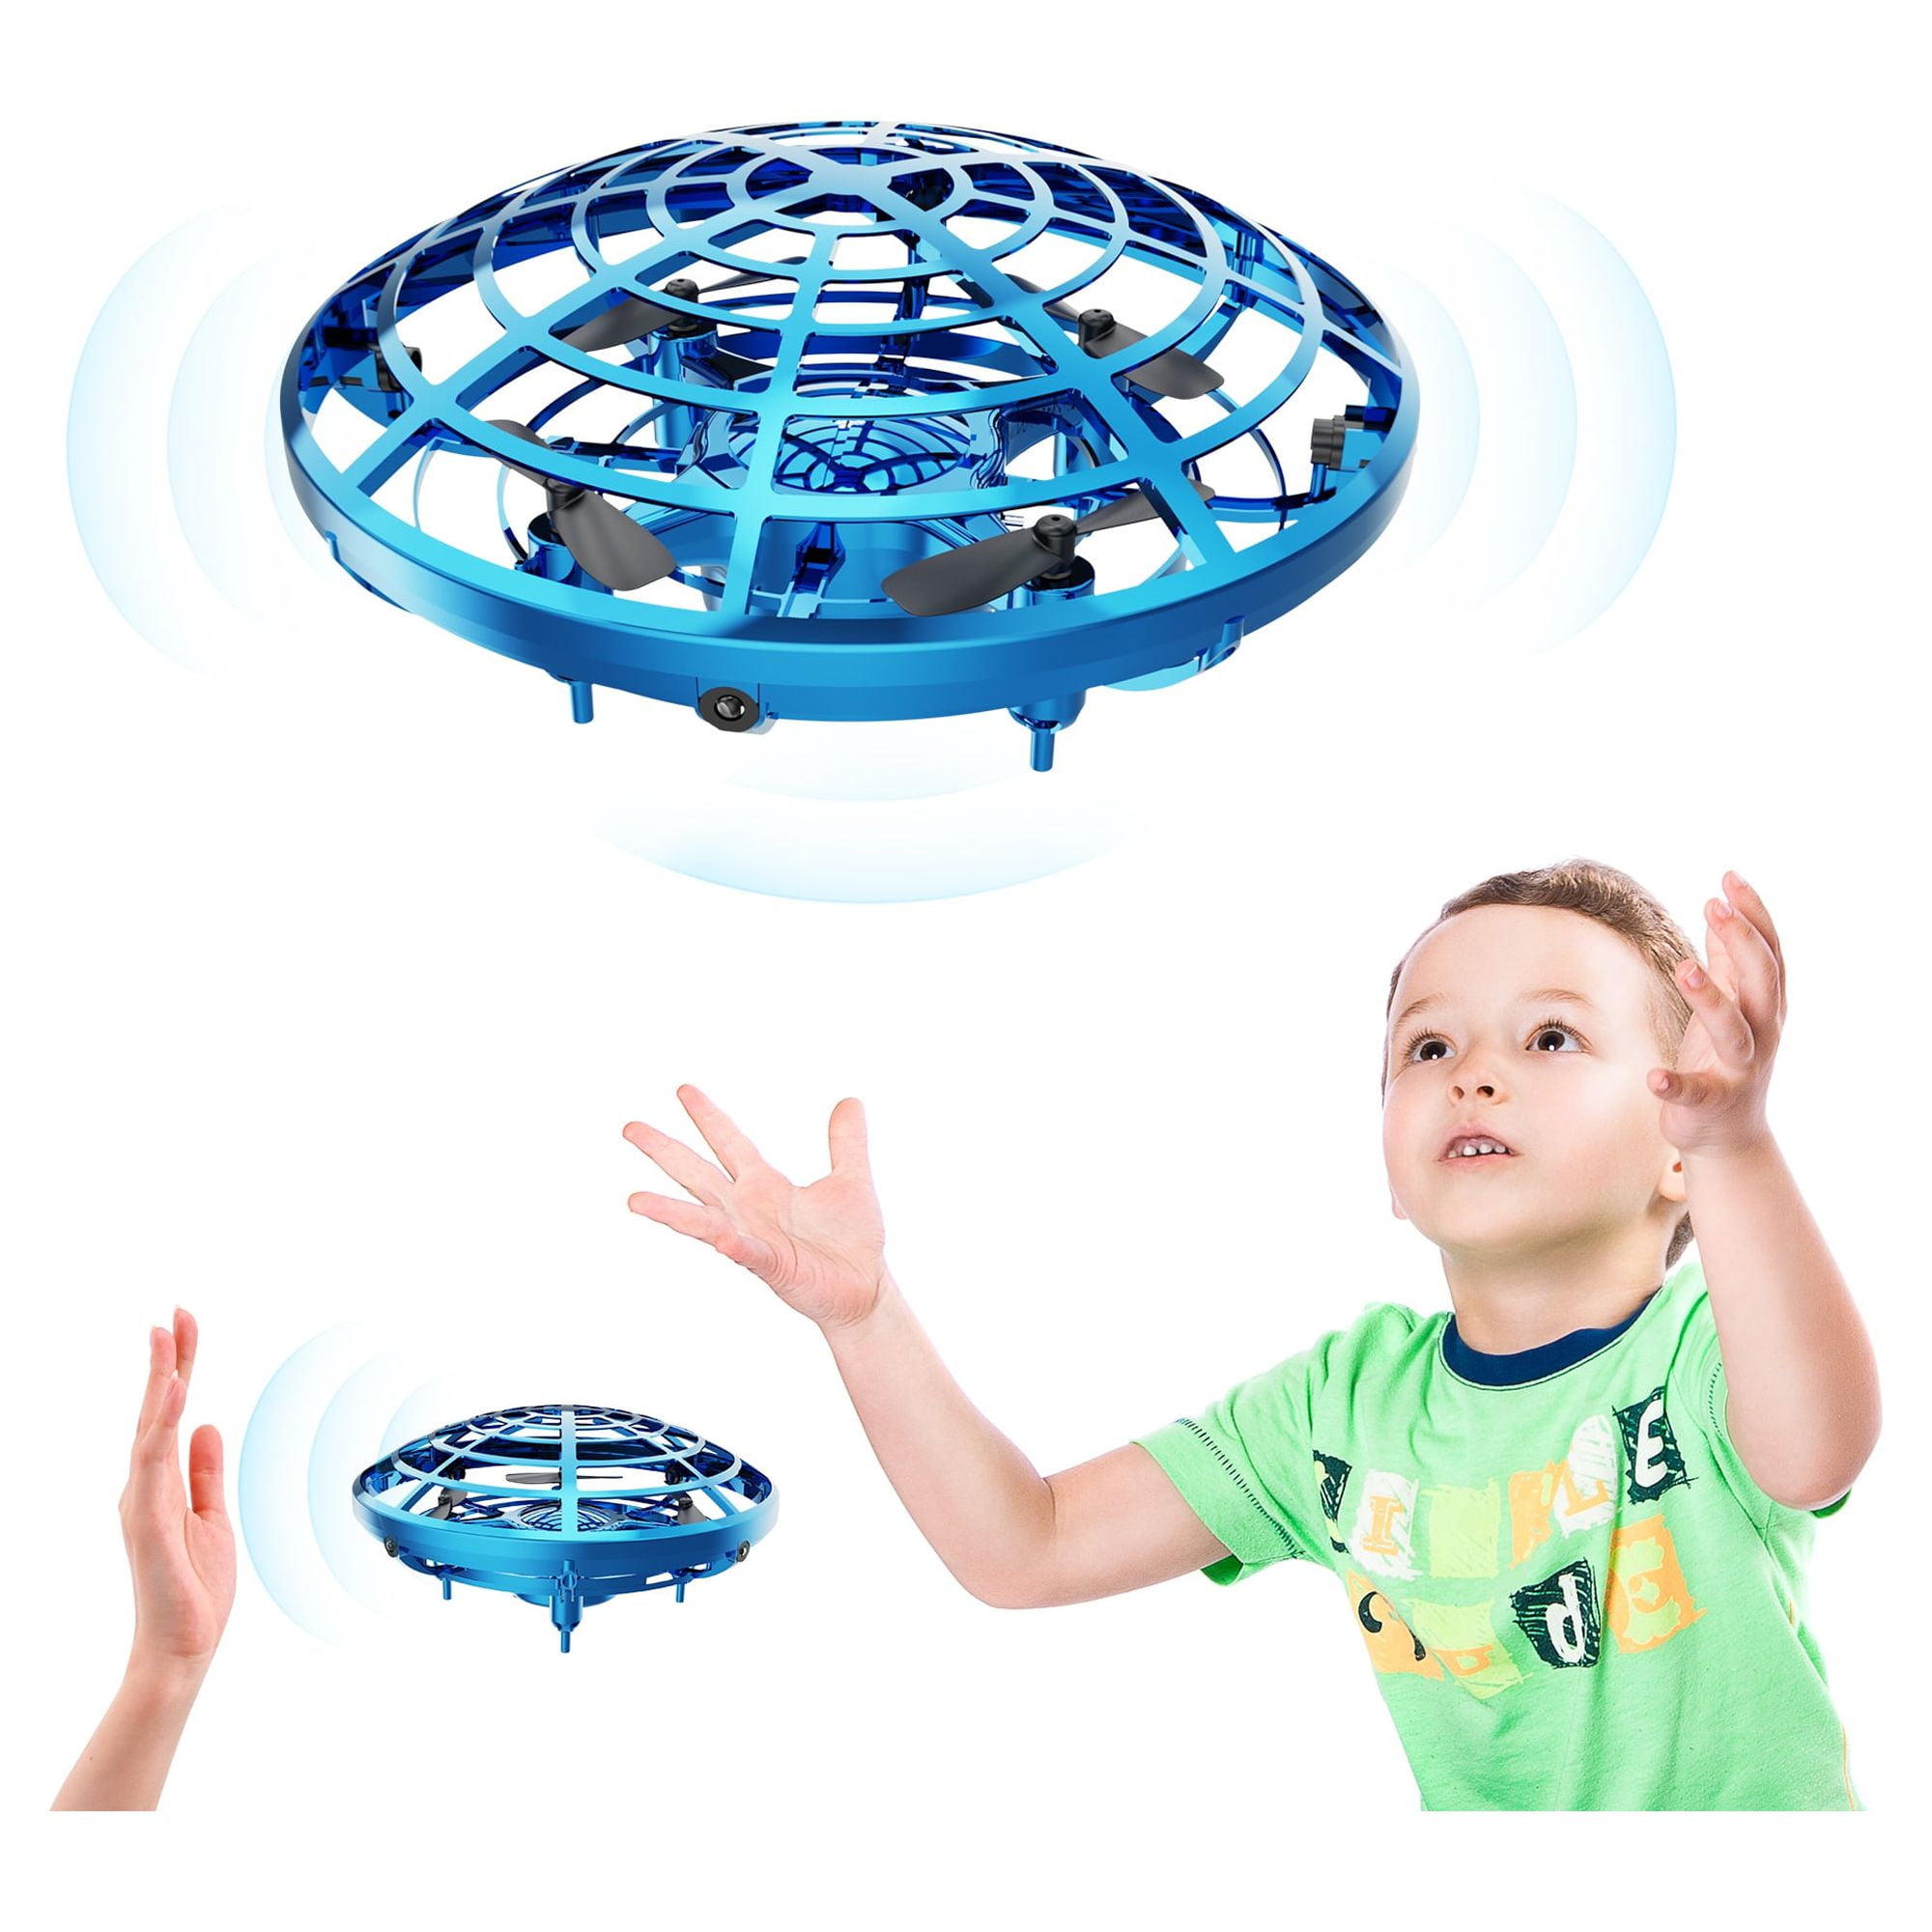 Fancydream Flying Ball, Hand Operated Drones For Kids Or Adults With Magic Controller, Boy Toy, Scoot Mini Drone For Kids, Ufo Flying Toy, Helicopter